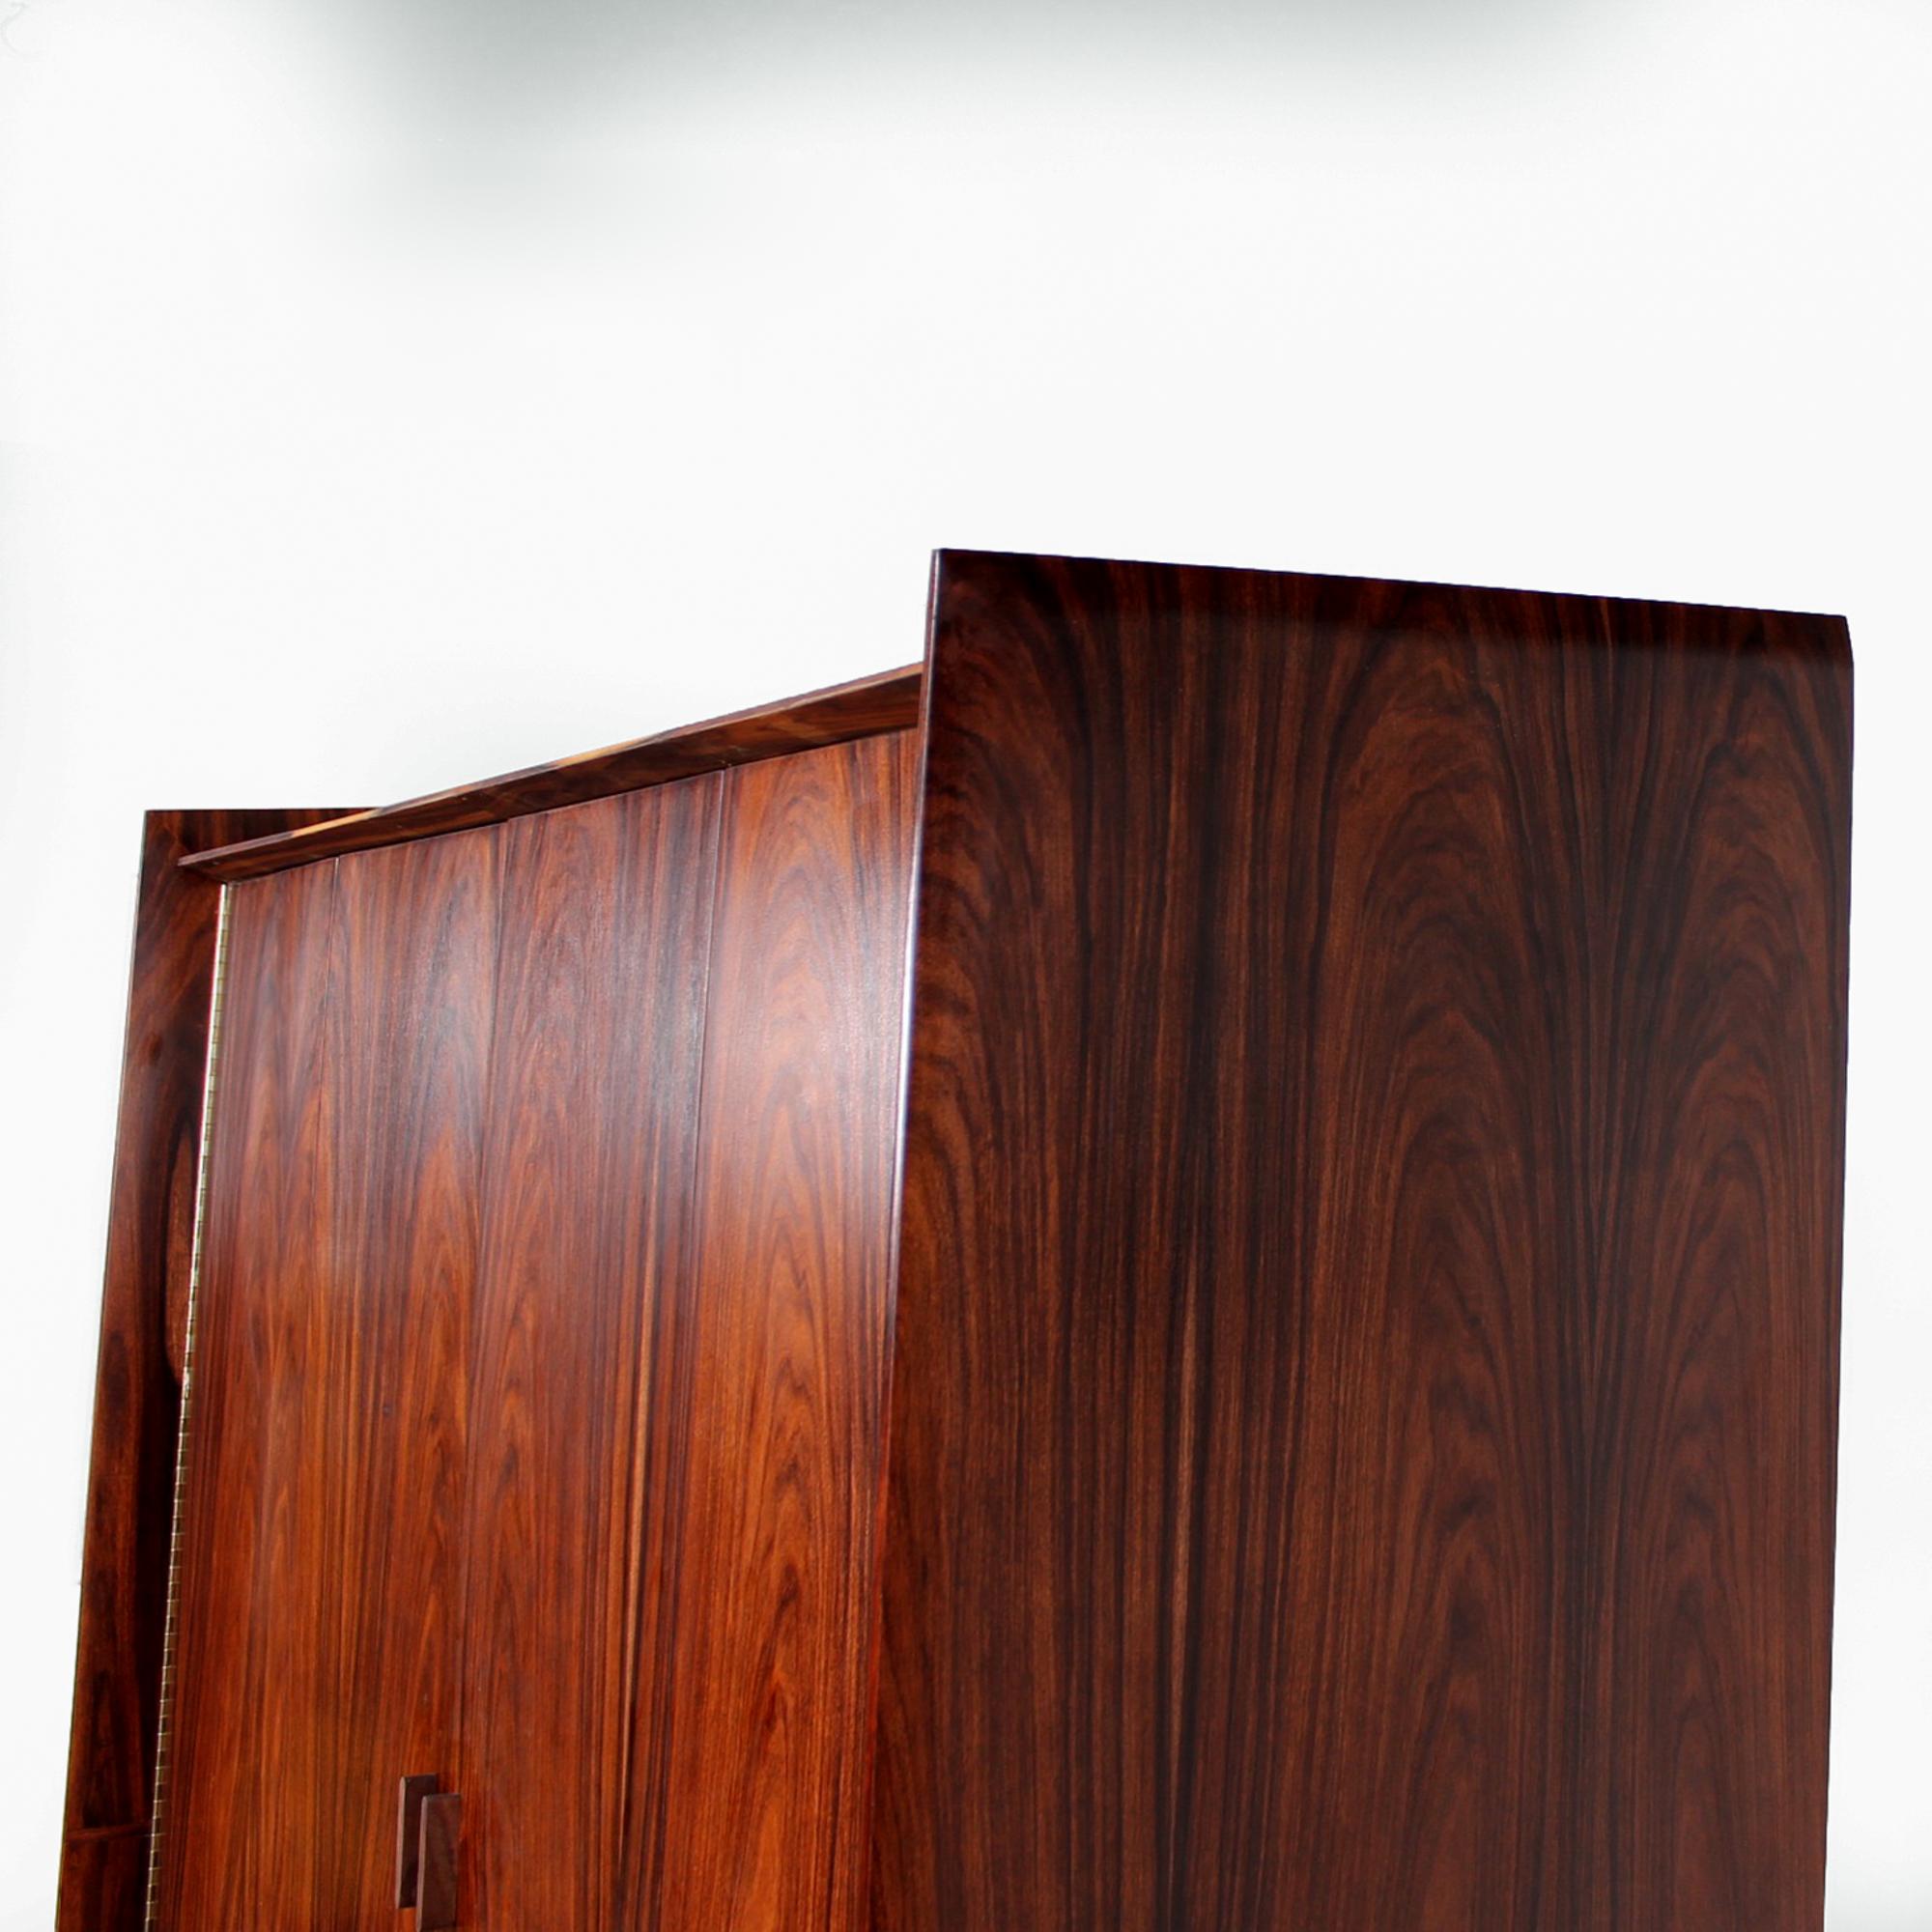 Ravishing Rosewood Armoire Gentleman's Cabinet Pablo Romo for Ambianic 2016 In Good Condition In Chula Vista, CA